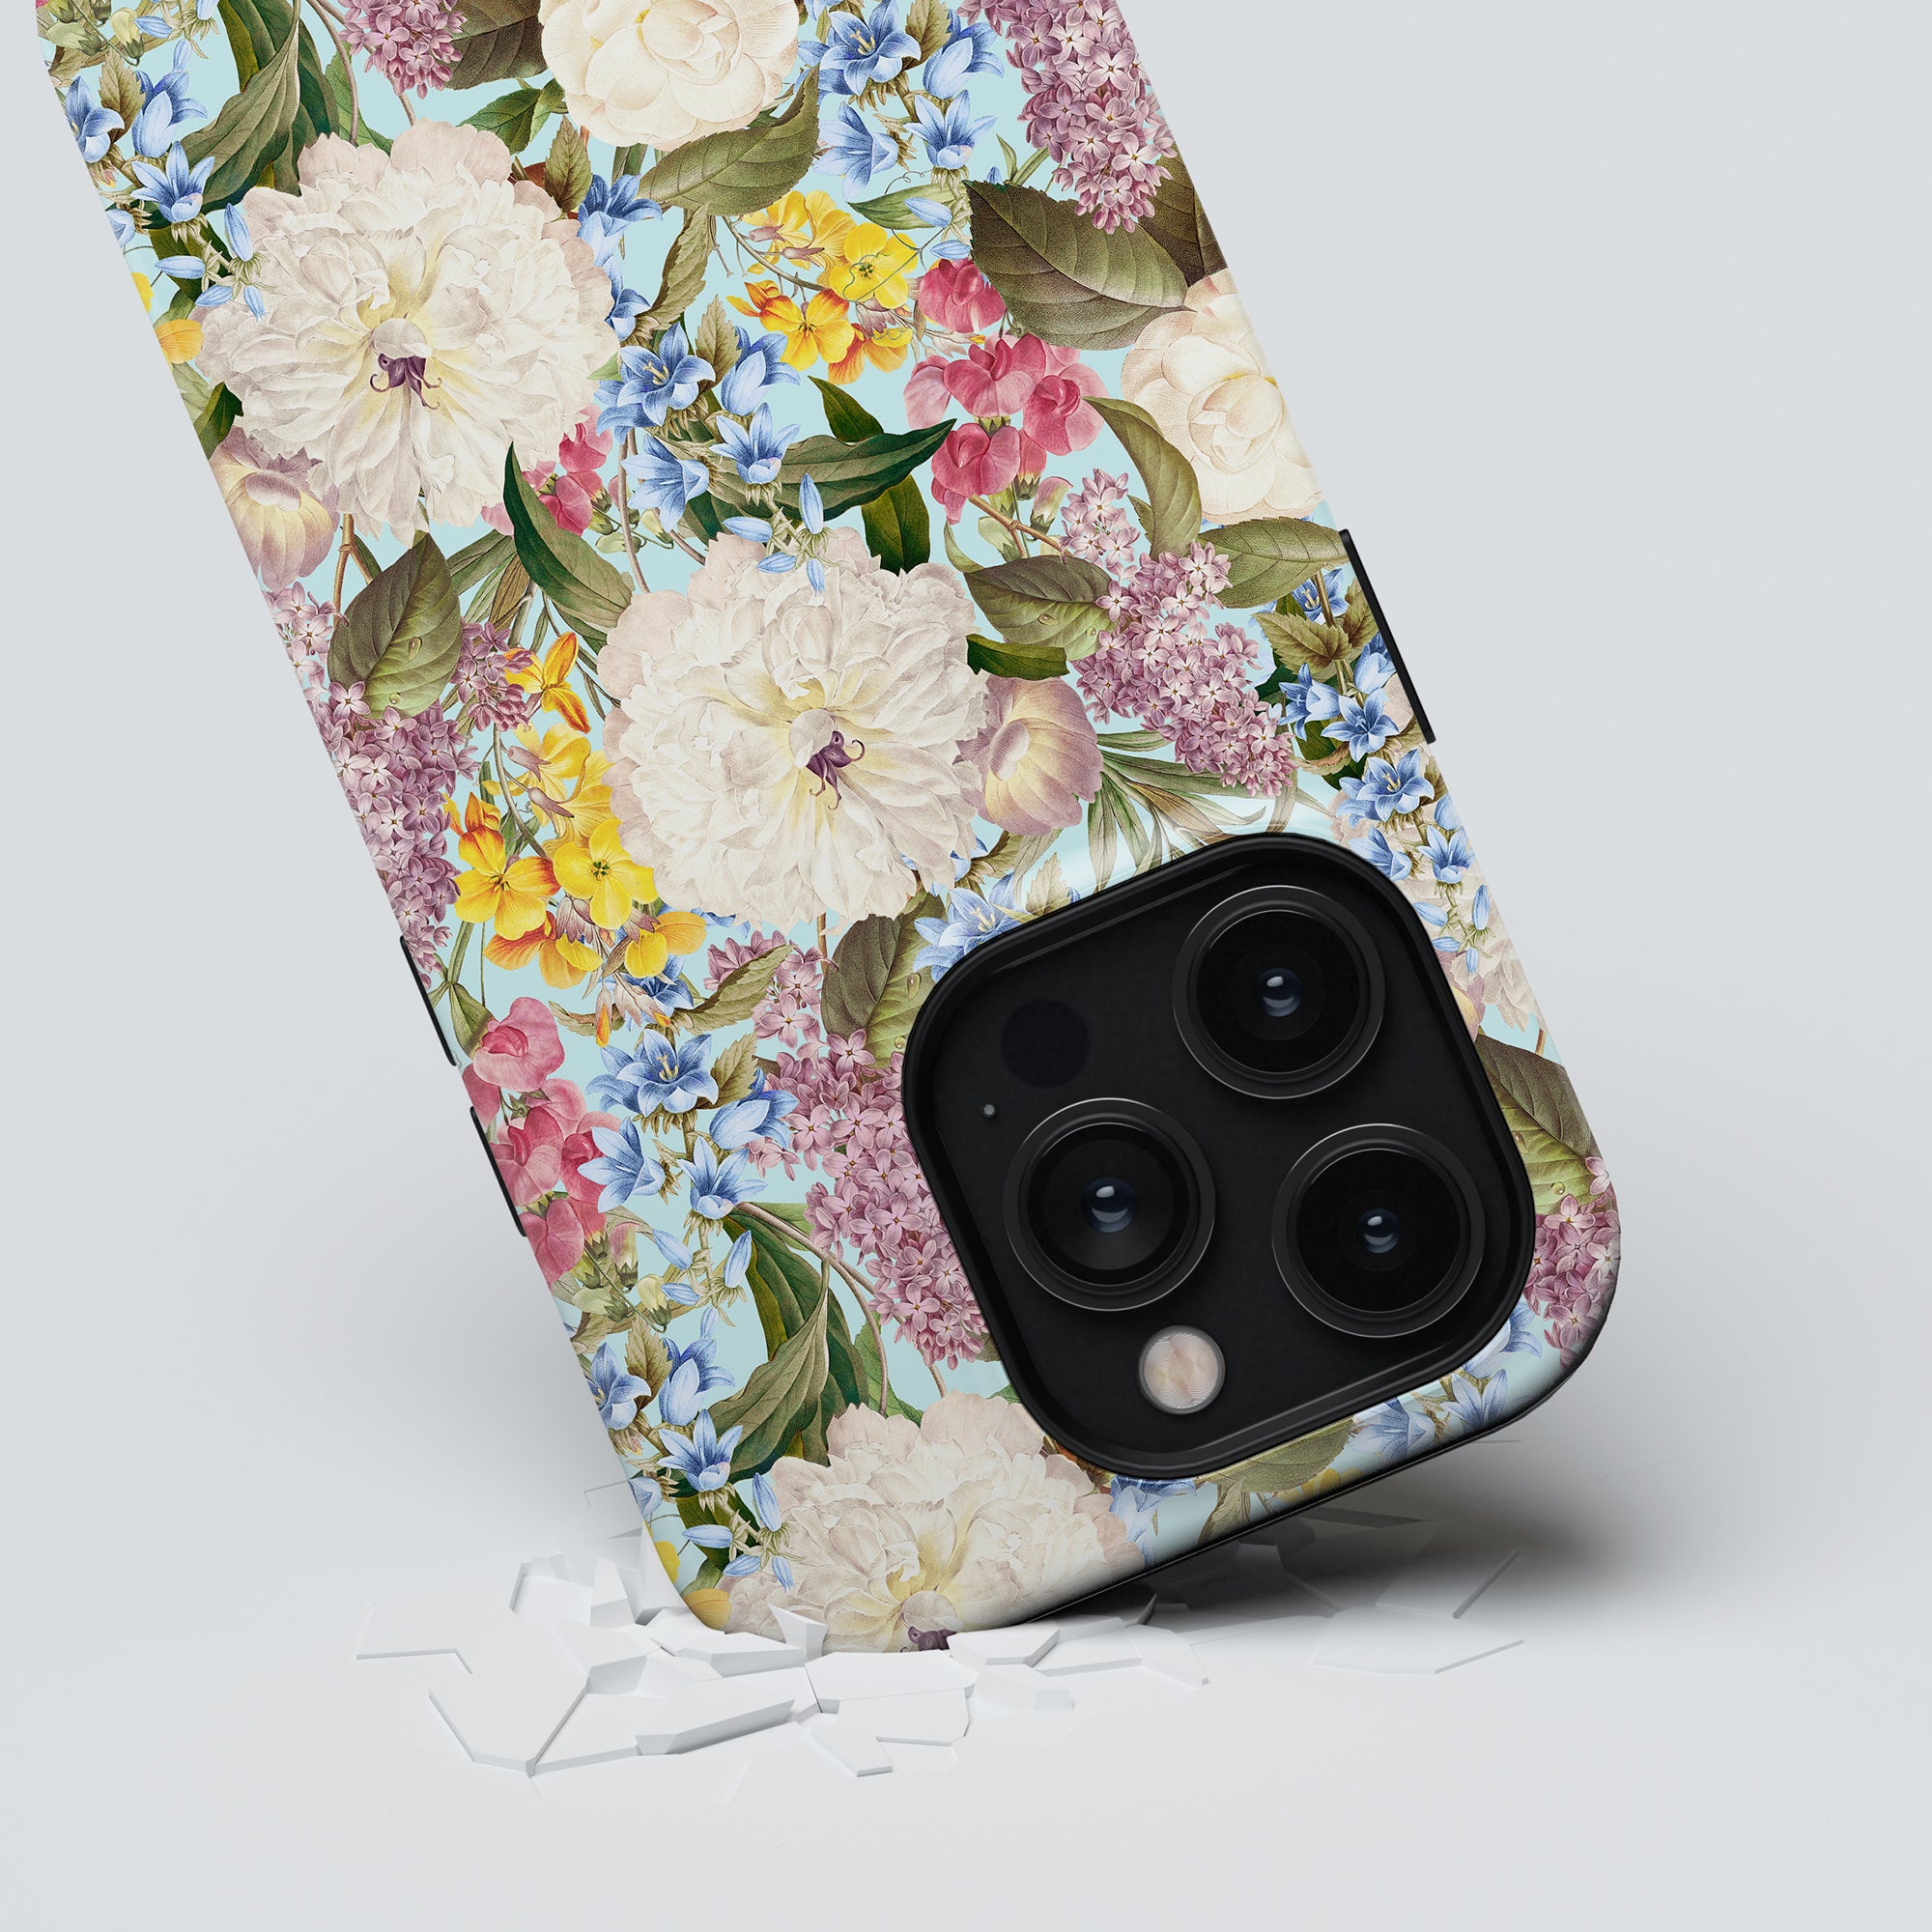 Fragrant Paradise - Tough Case with a stylish floral case partially submerged in a white surface.